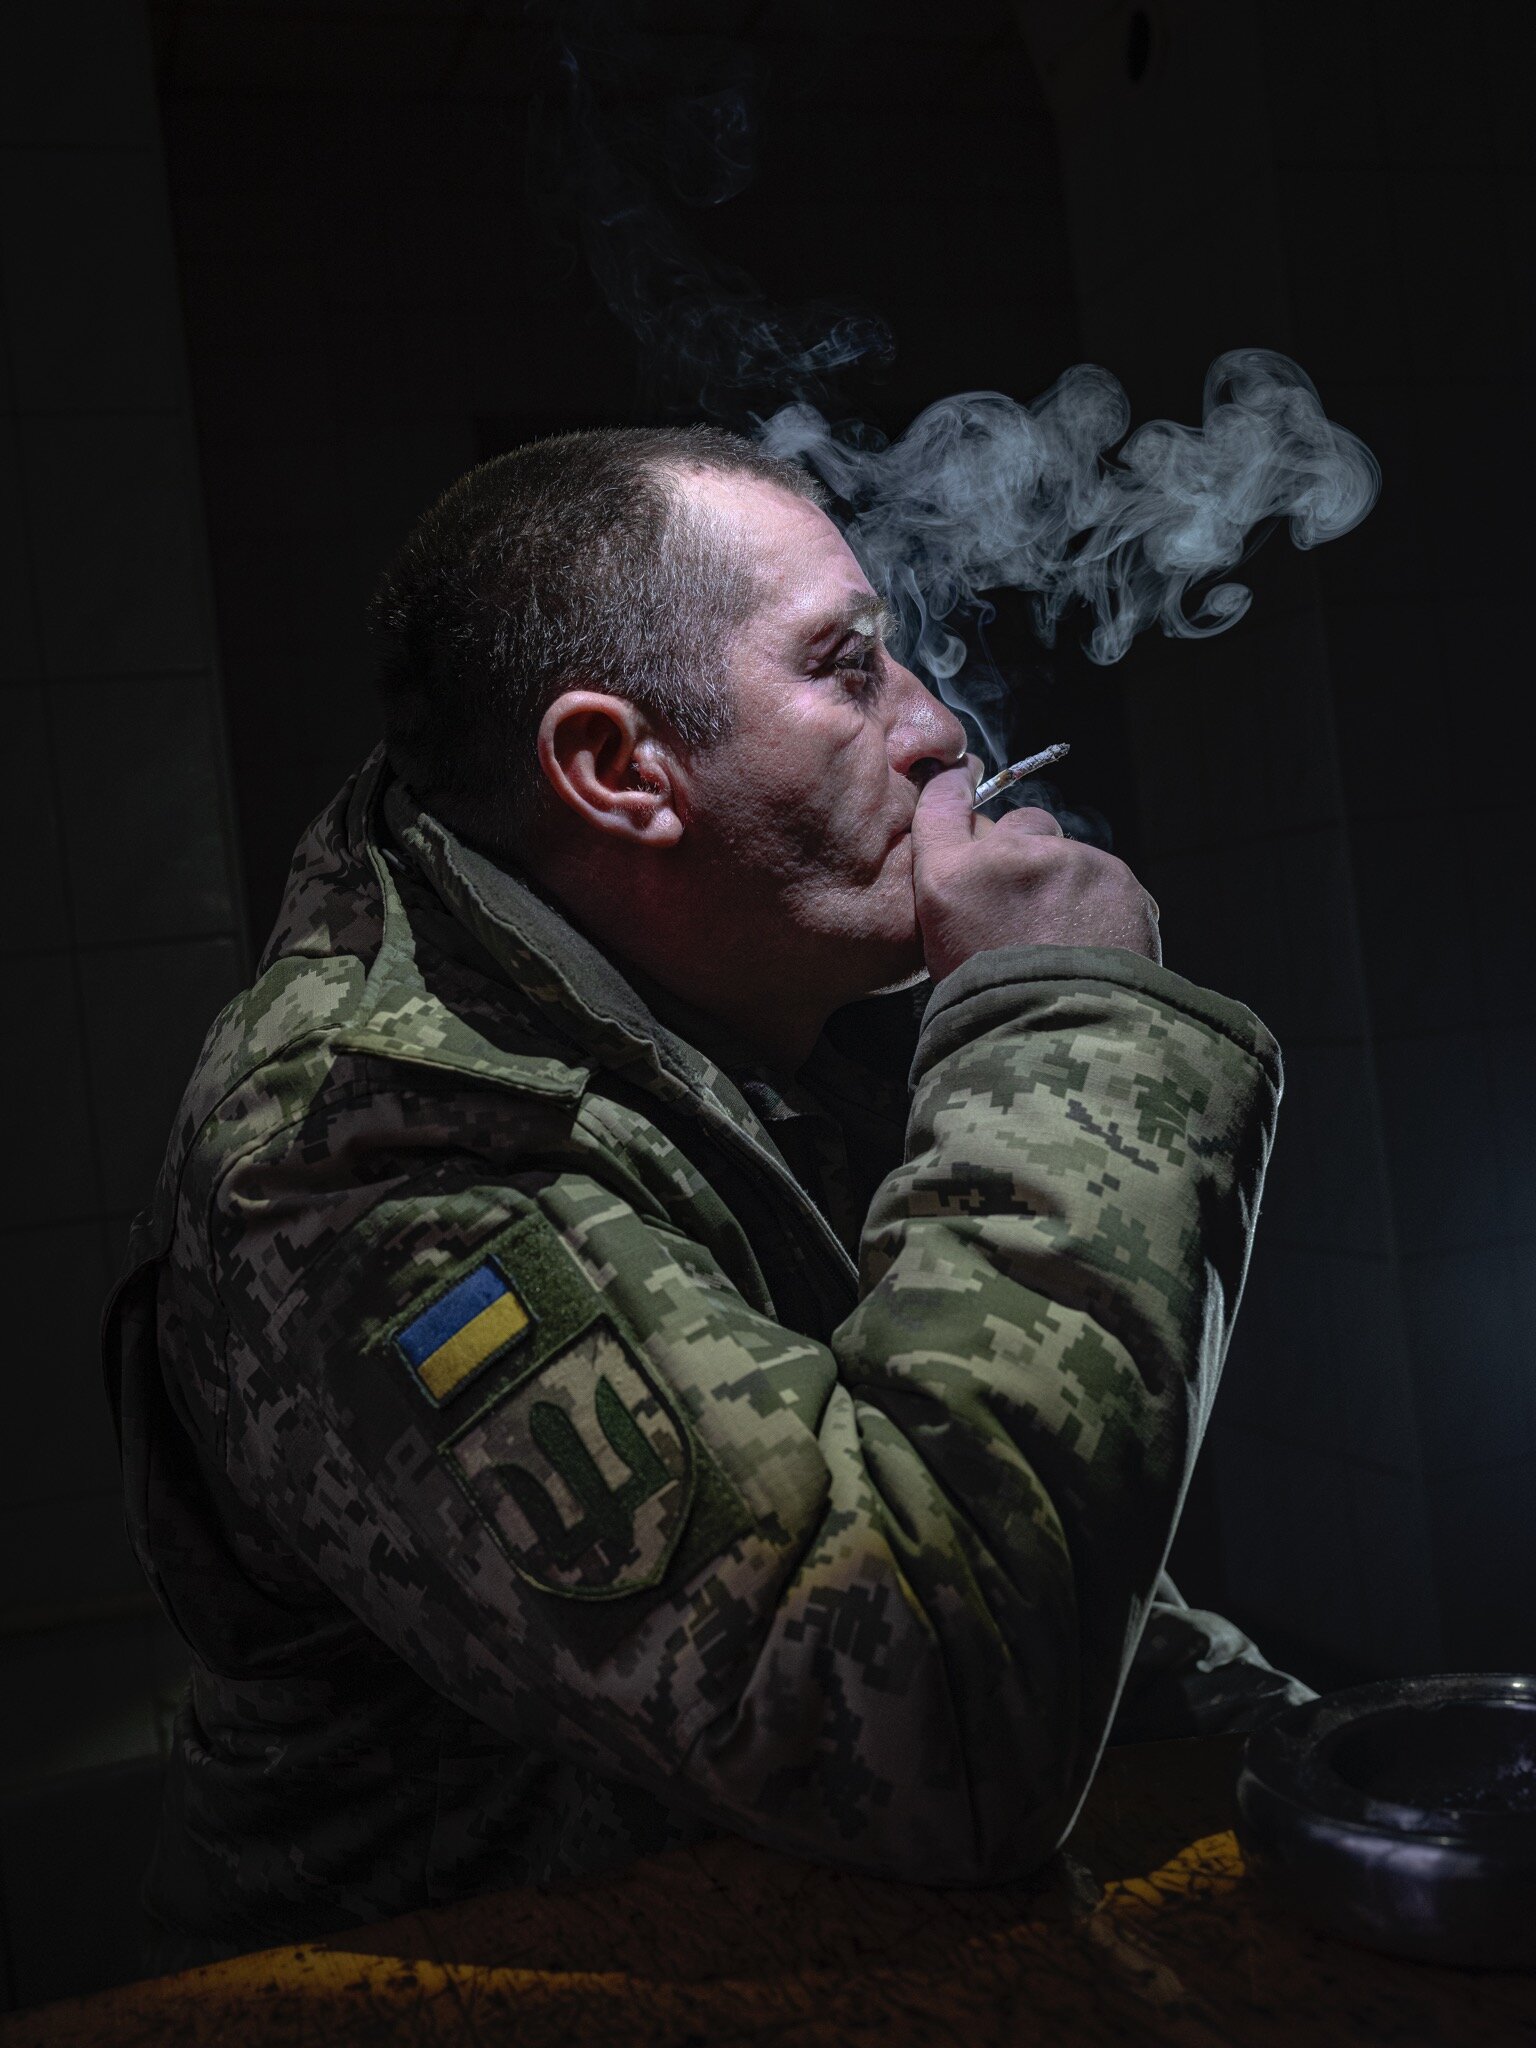 19mag-Ukraine-33-mobileMasterAt3x ‘I Live in Hell’: The Psychic Wounds of Ukraine’s Soldiers